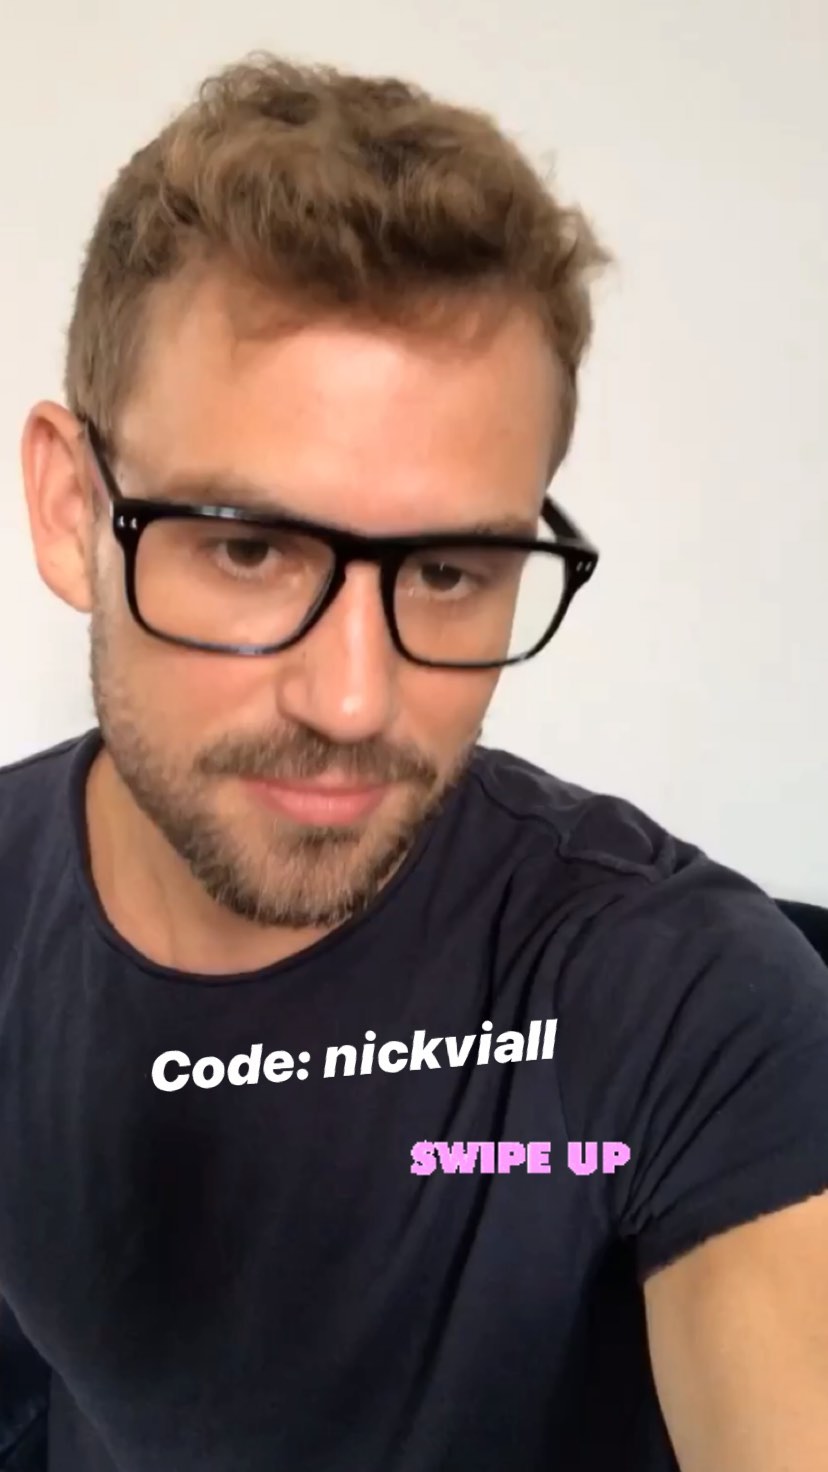 nick viall - Nick Viall - Bachelor 21 - FAN Forum - Discussion #27 - Page 59 66609210